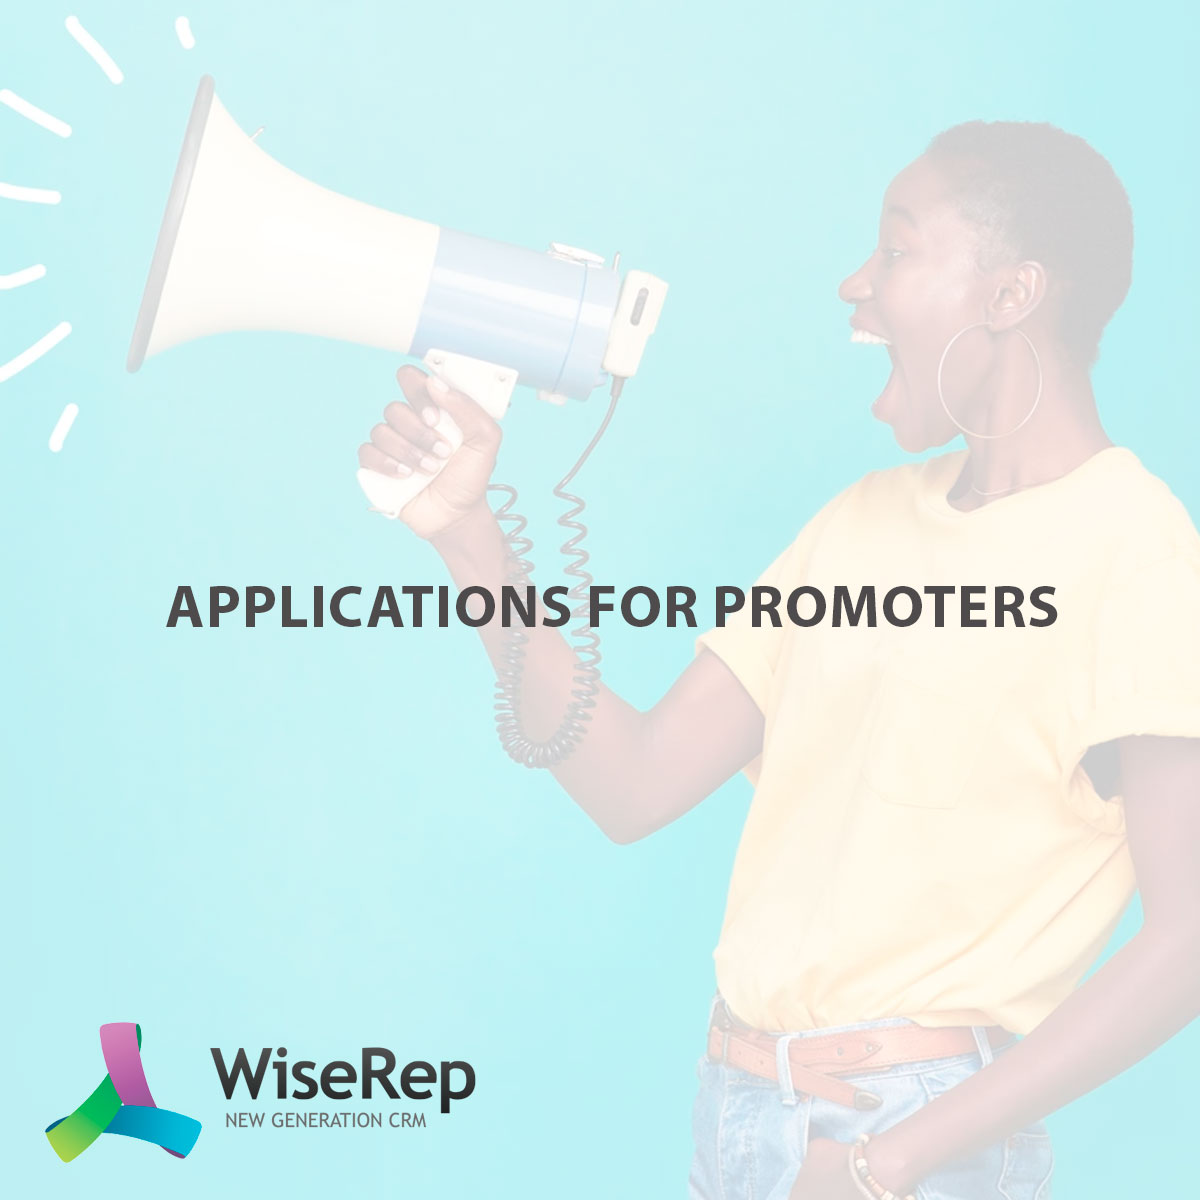  Applications for Promoters